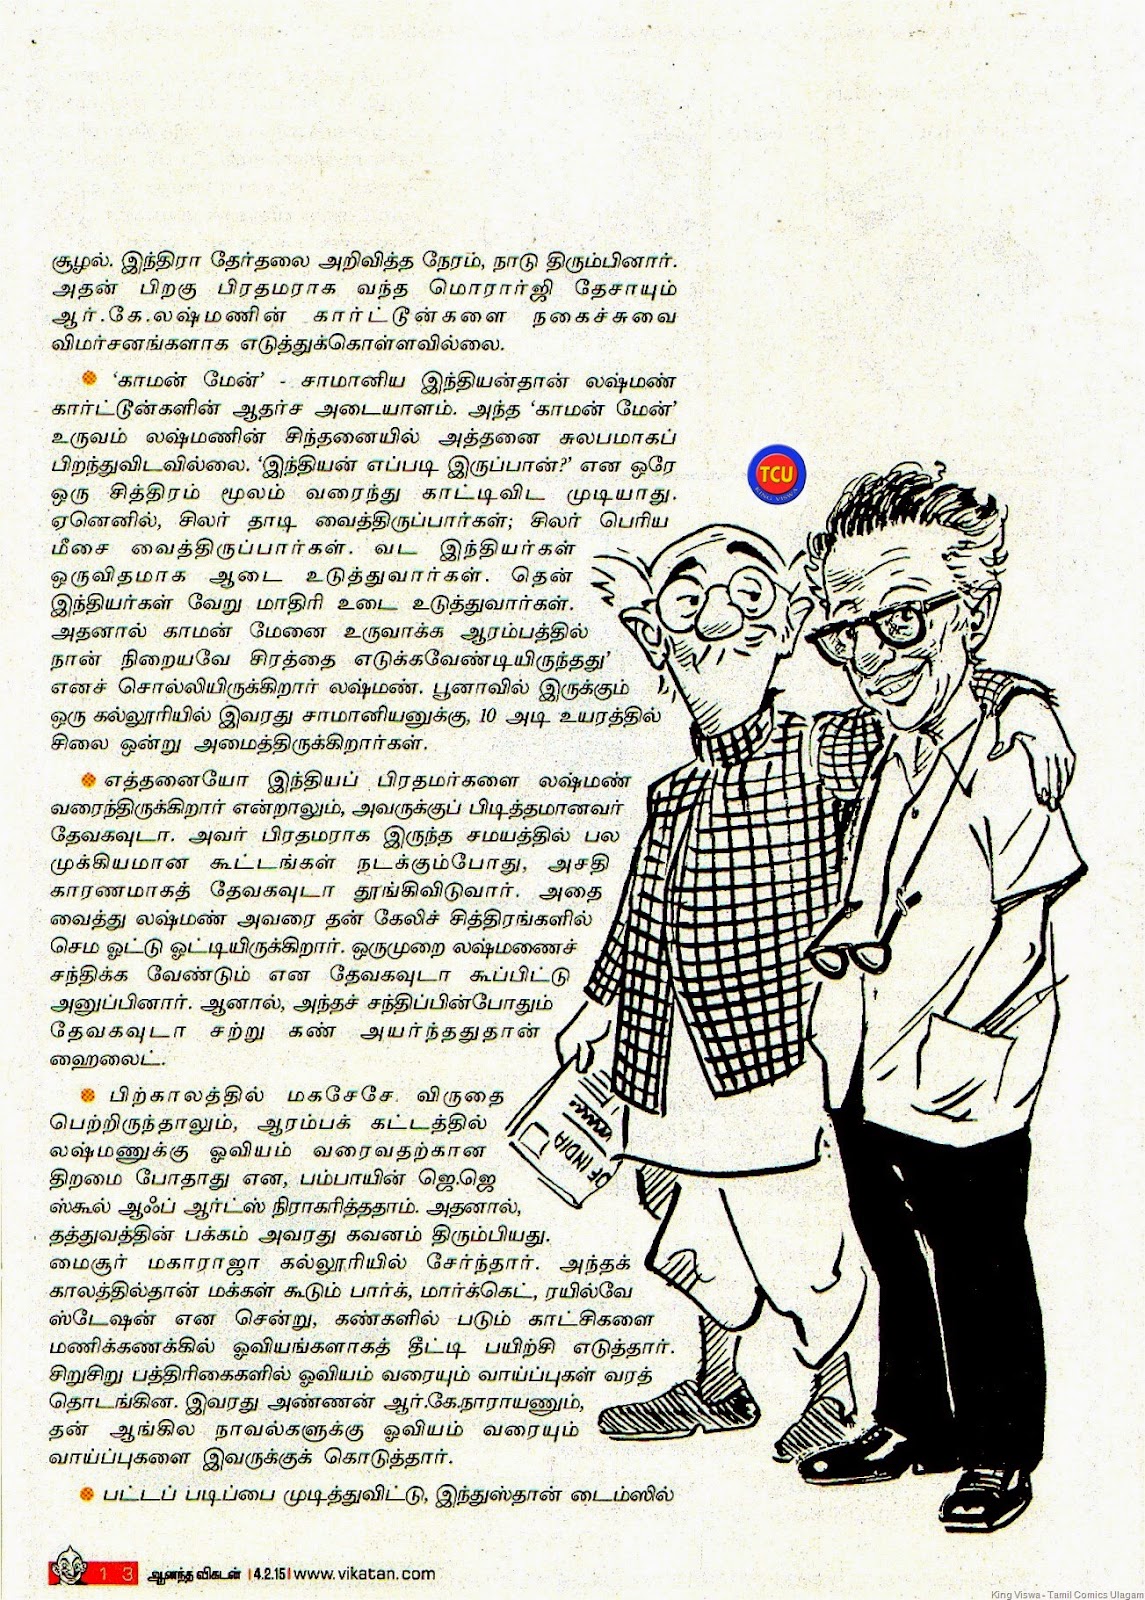 [Aanandha%2520Vikatan%2520Tamil%2520Weekly%2520Magazine%2520Issue%2520Dated%252004022015%2520On%2520Stands%252029012015%2520Tribute%2520to%2520RKL%2520Page%2520No%252013%255B2%255D.jpg]